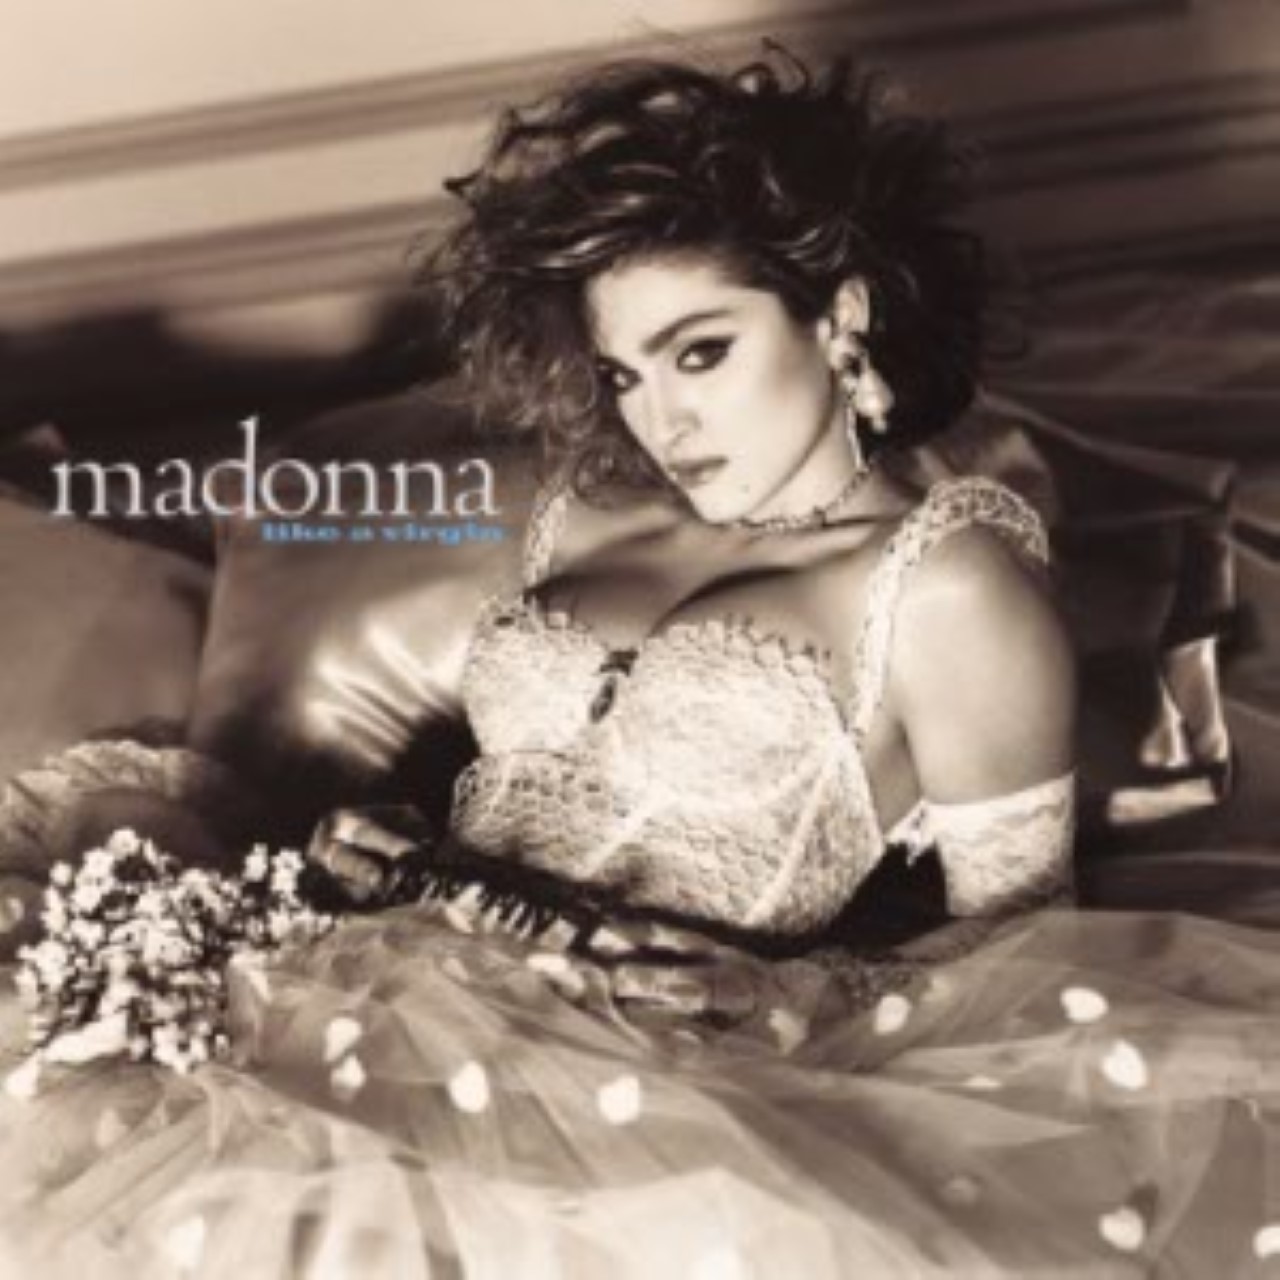 Art for Into the Groove by Madonna